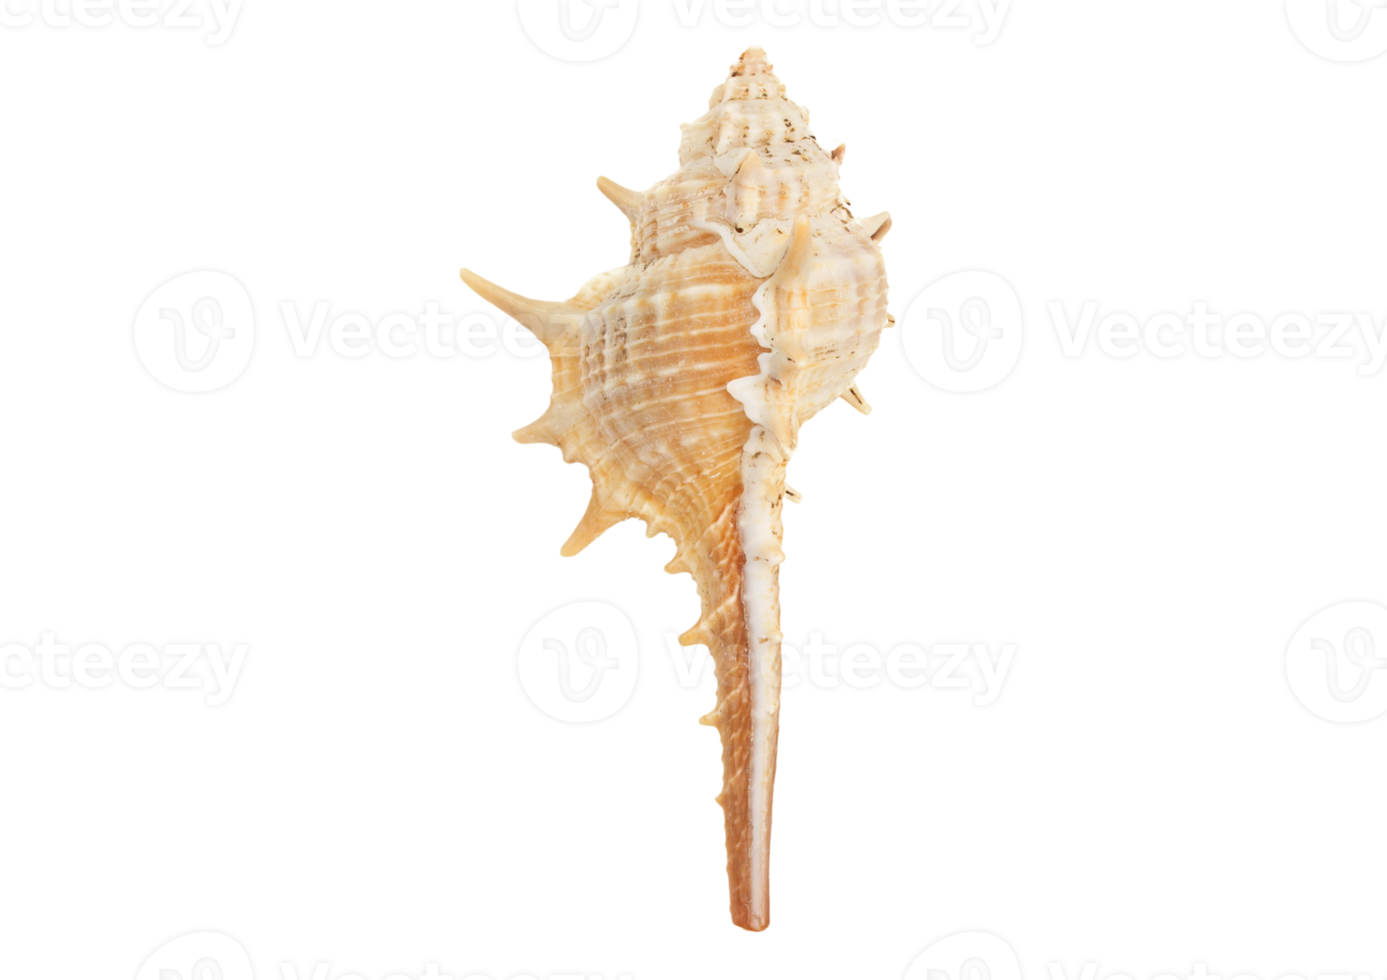 Seashell decoration isolated on a transparent background png